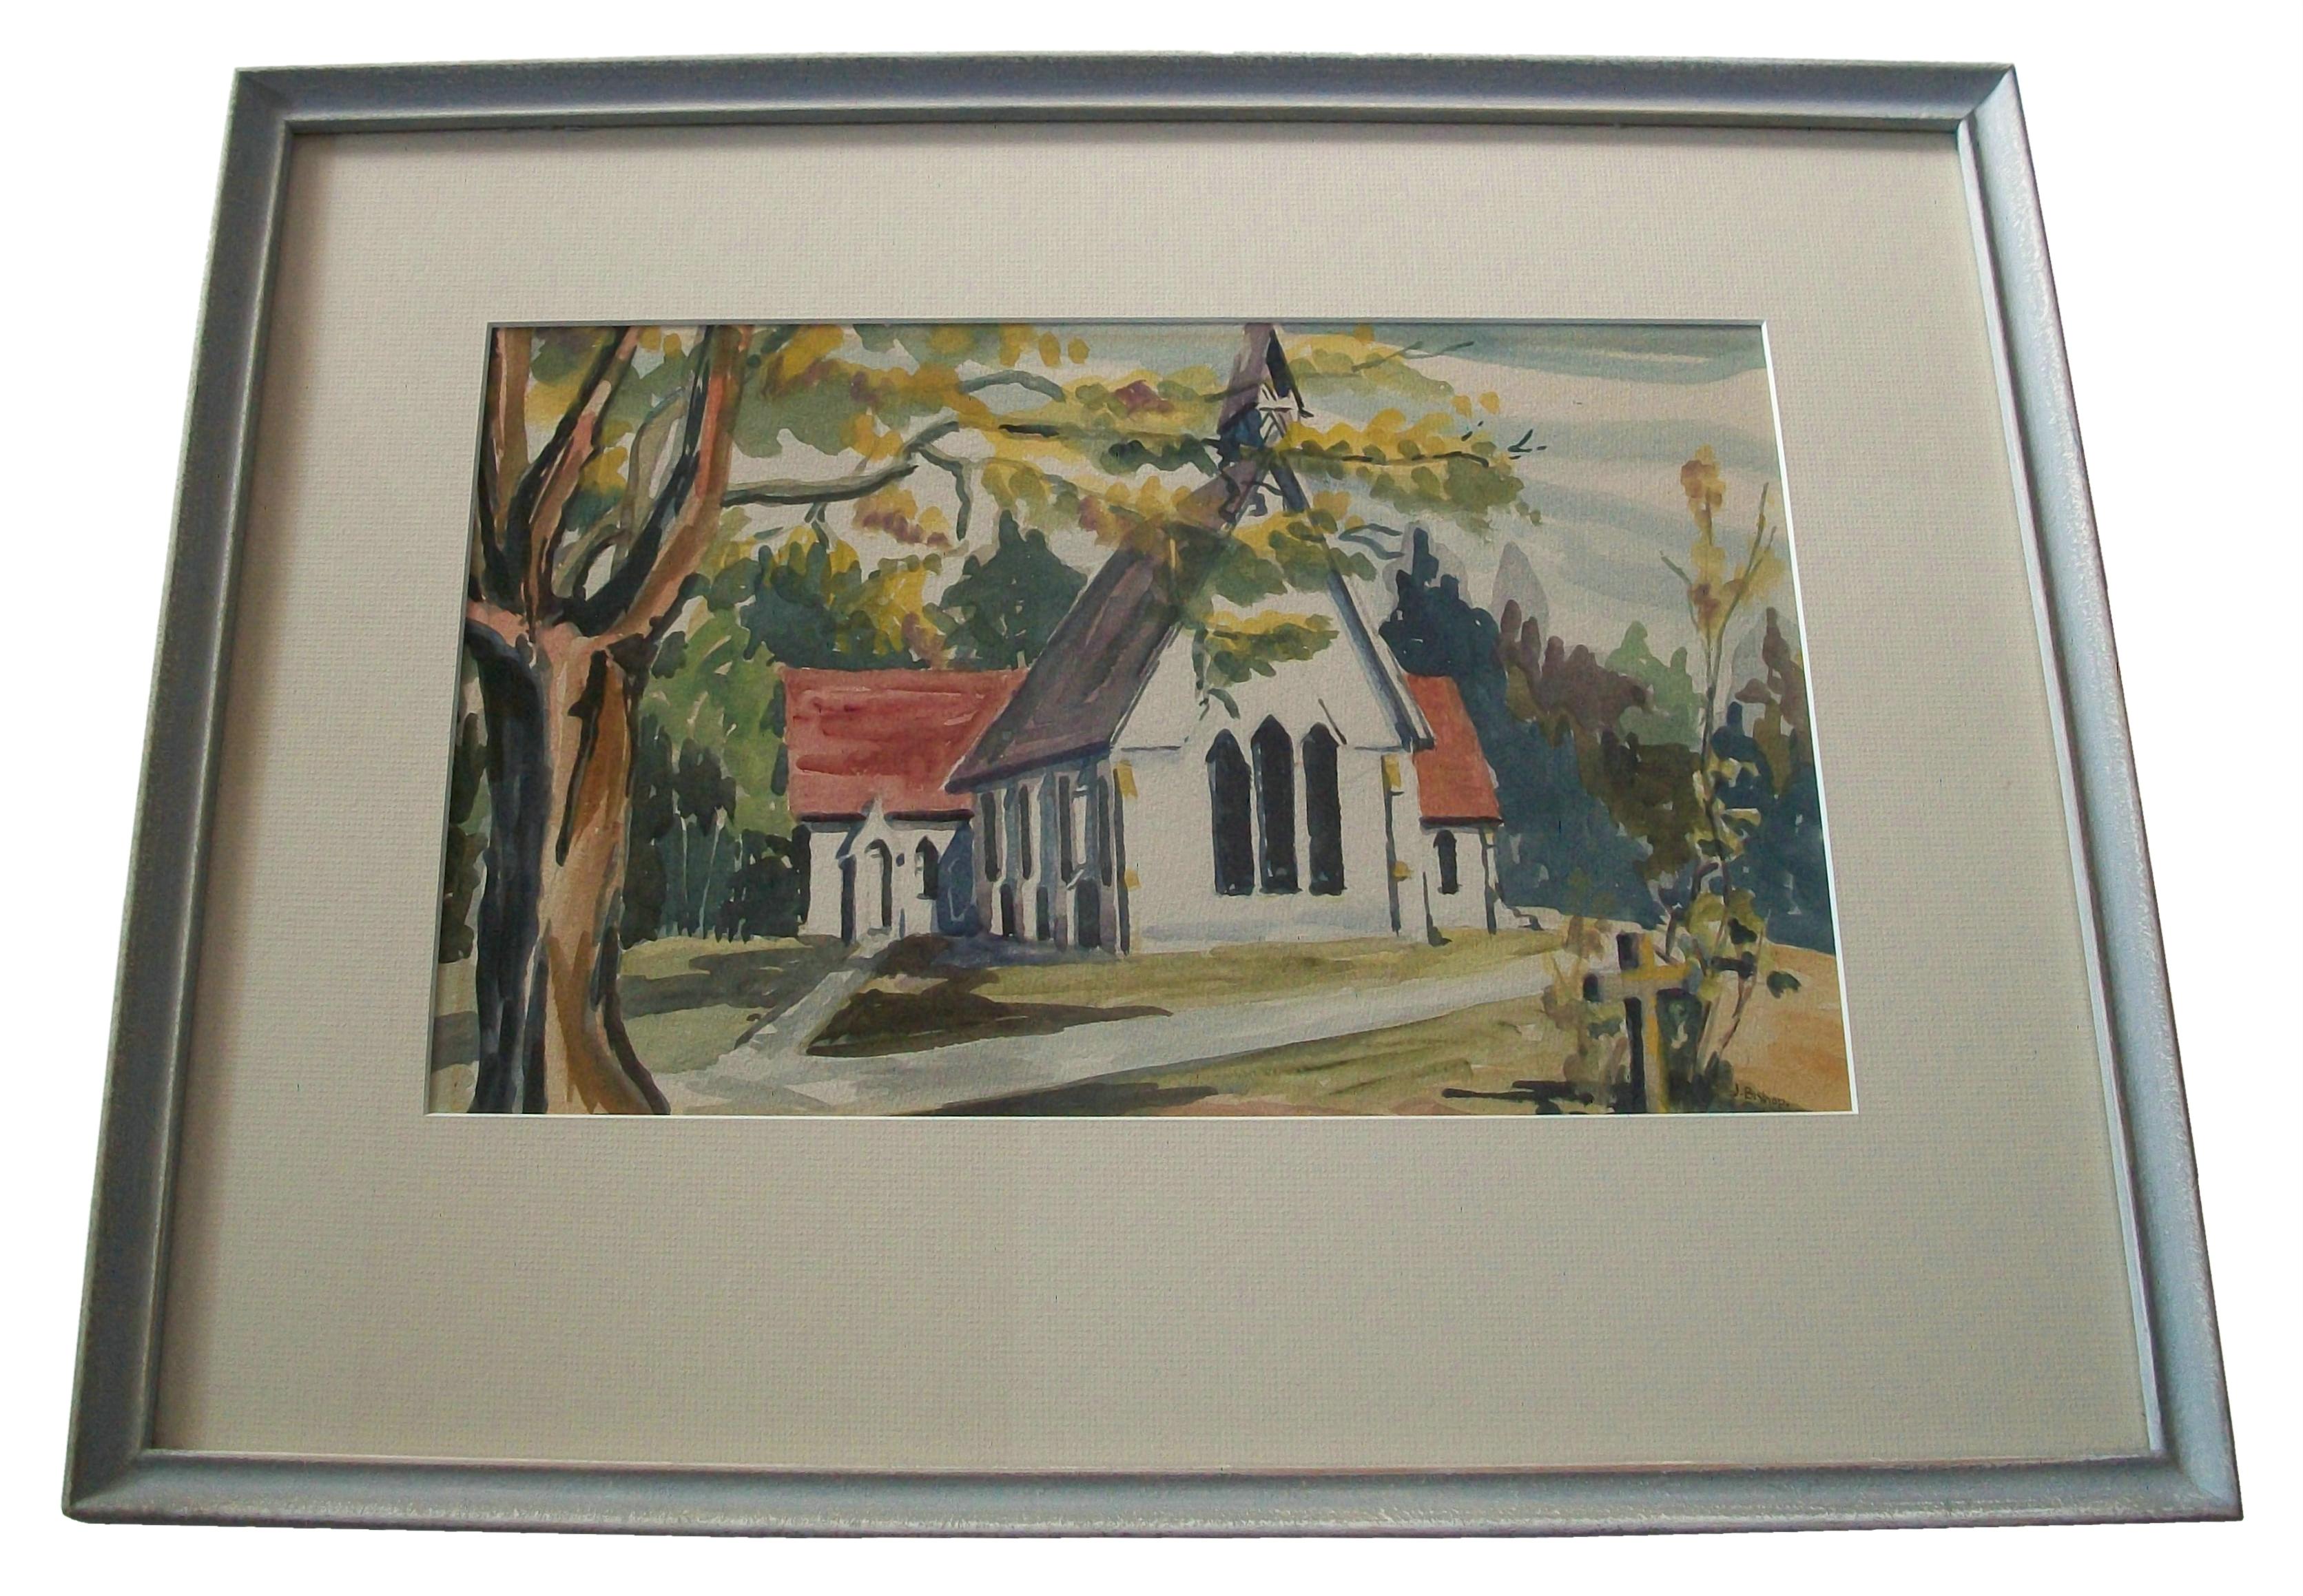 Country J. BISHOP - 'Untitled' - Vintage Watercolor Painting - Framed - Canada - 20th C. For Sale